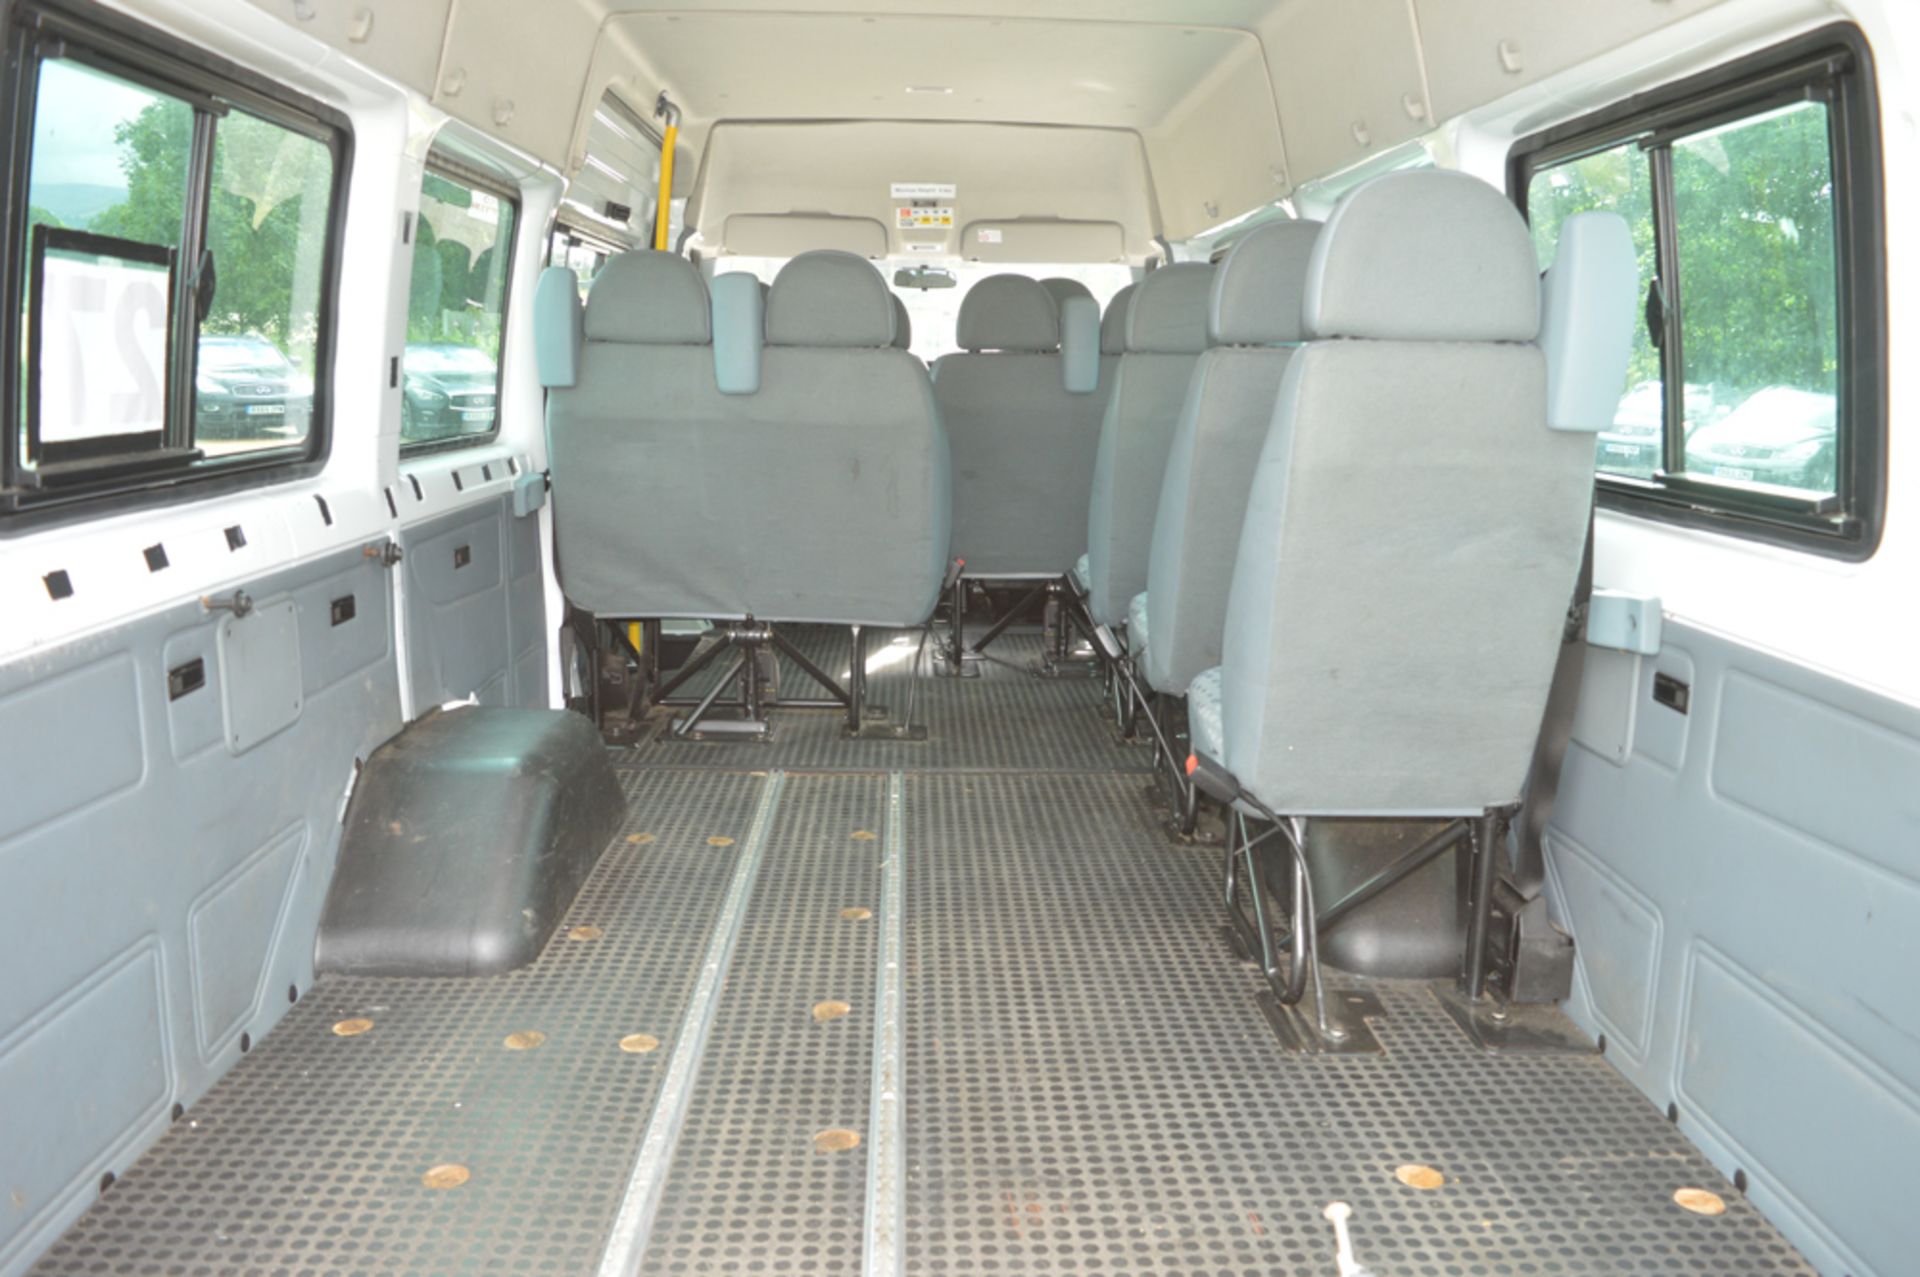 Ford Transit 135 T430 RWD 9 seat minibus Registration Number: GY61 VZA Date of Registration: 30/ - Image 8 of 12